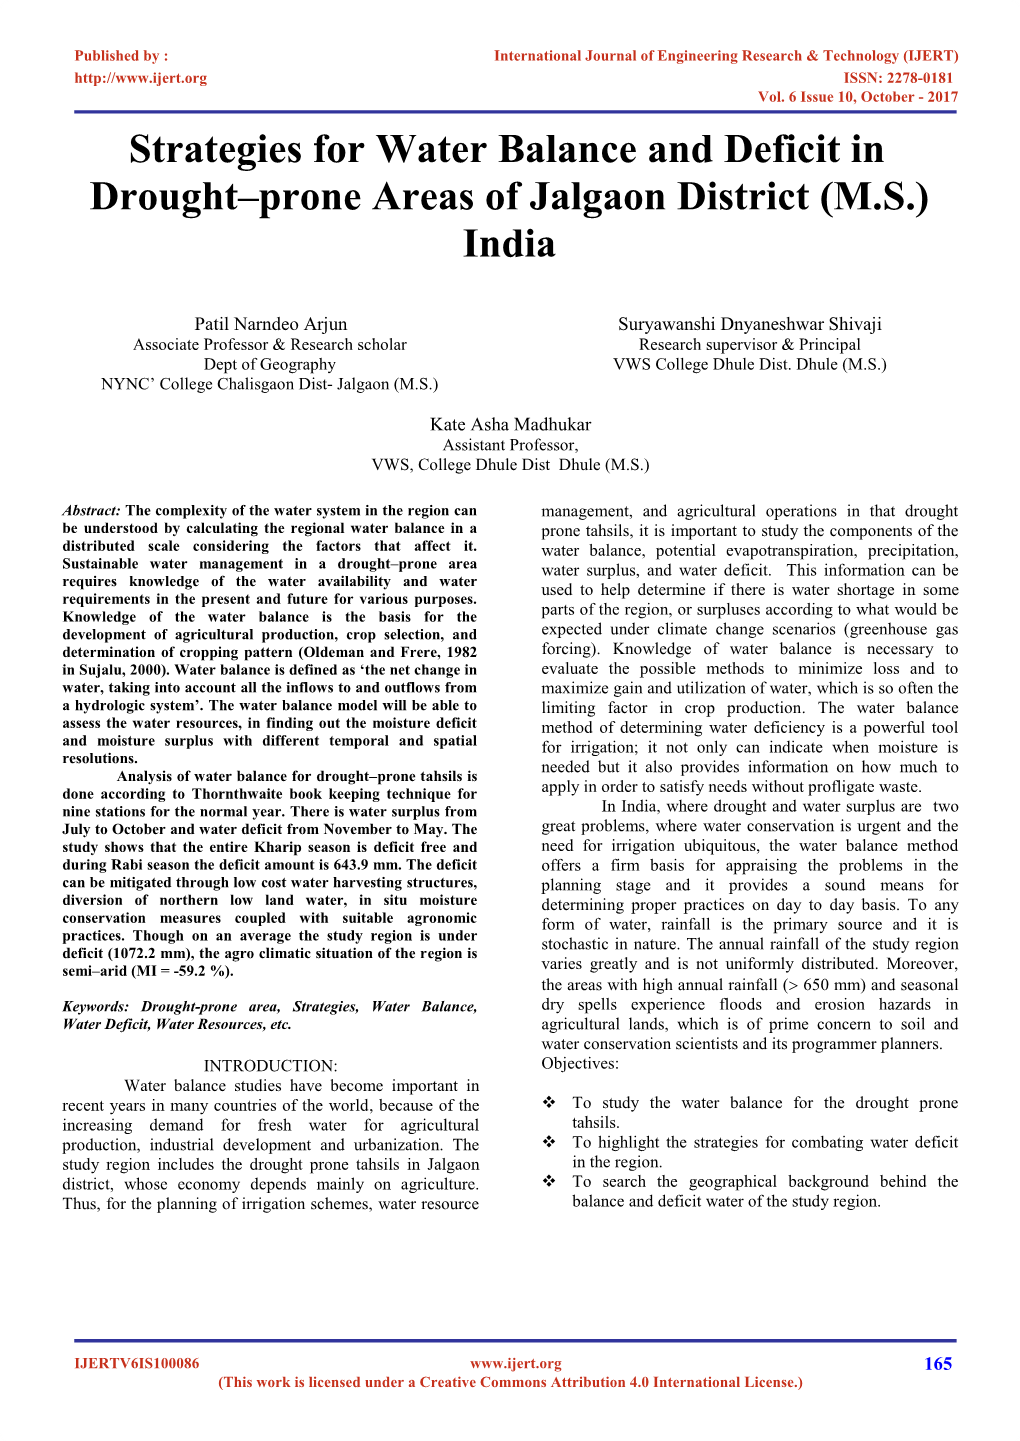 Strategies for Water Balance and Deficit in Drought–Prone Areas of Jalgaon District (M.S.) India